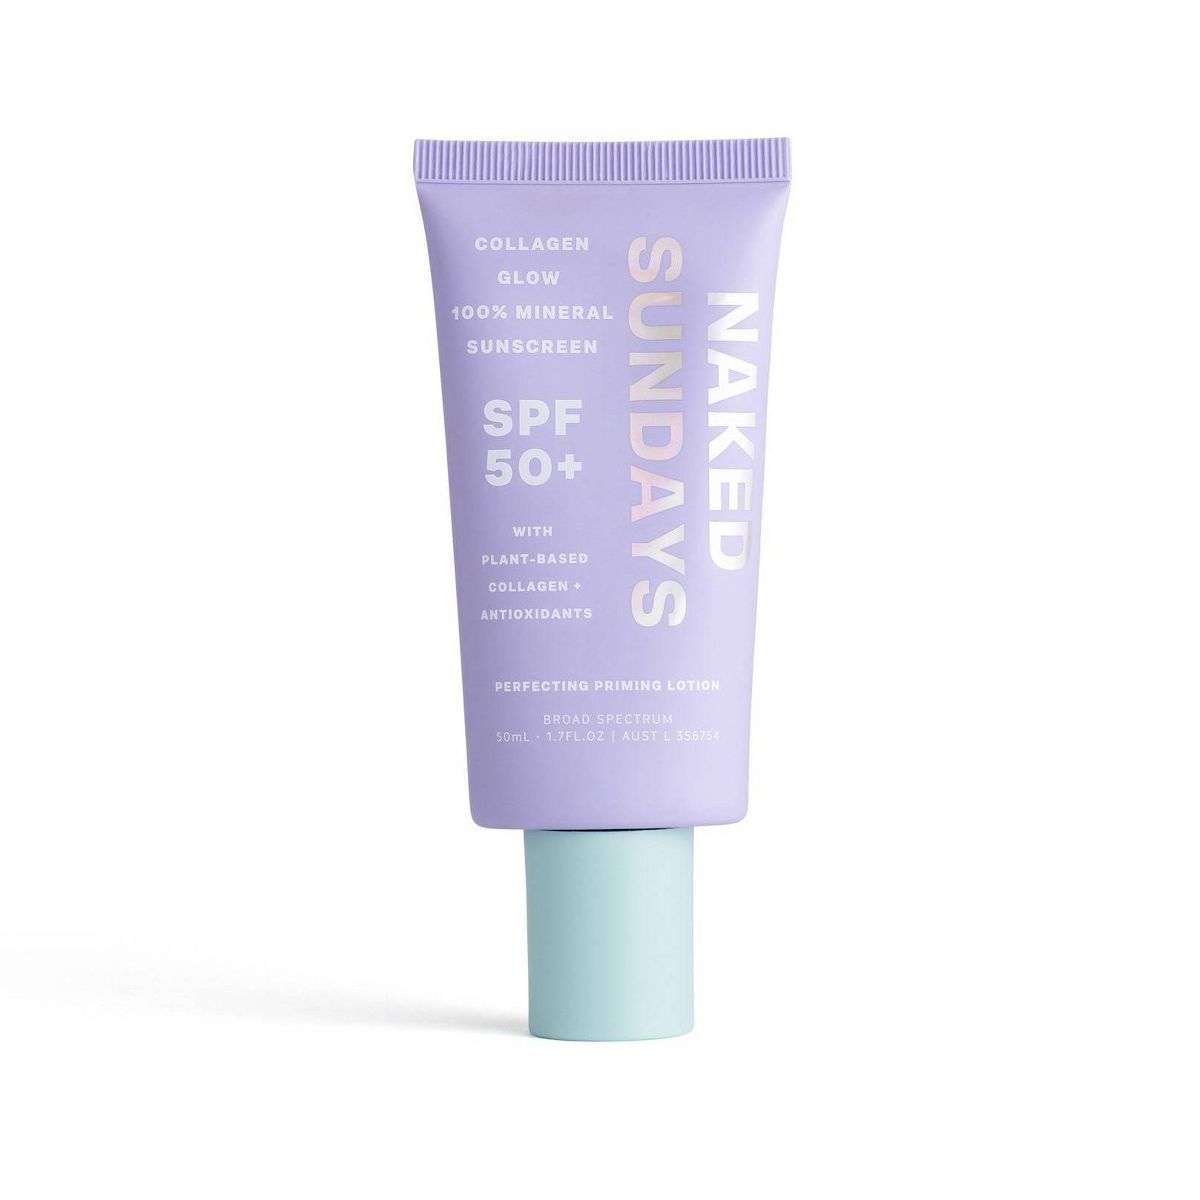 Naked Sundays Collagen Glow 100% Mineral Perfecting Priming Lotion - SPF50 + - 50ml | Target